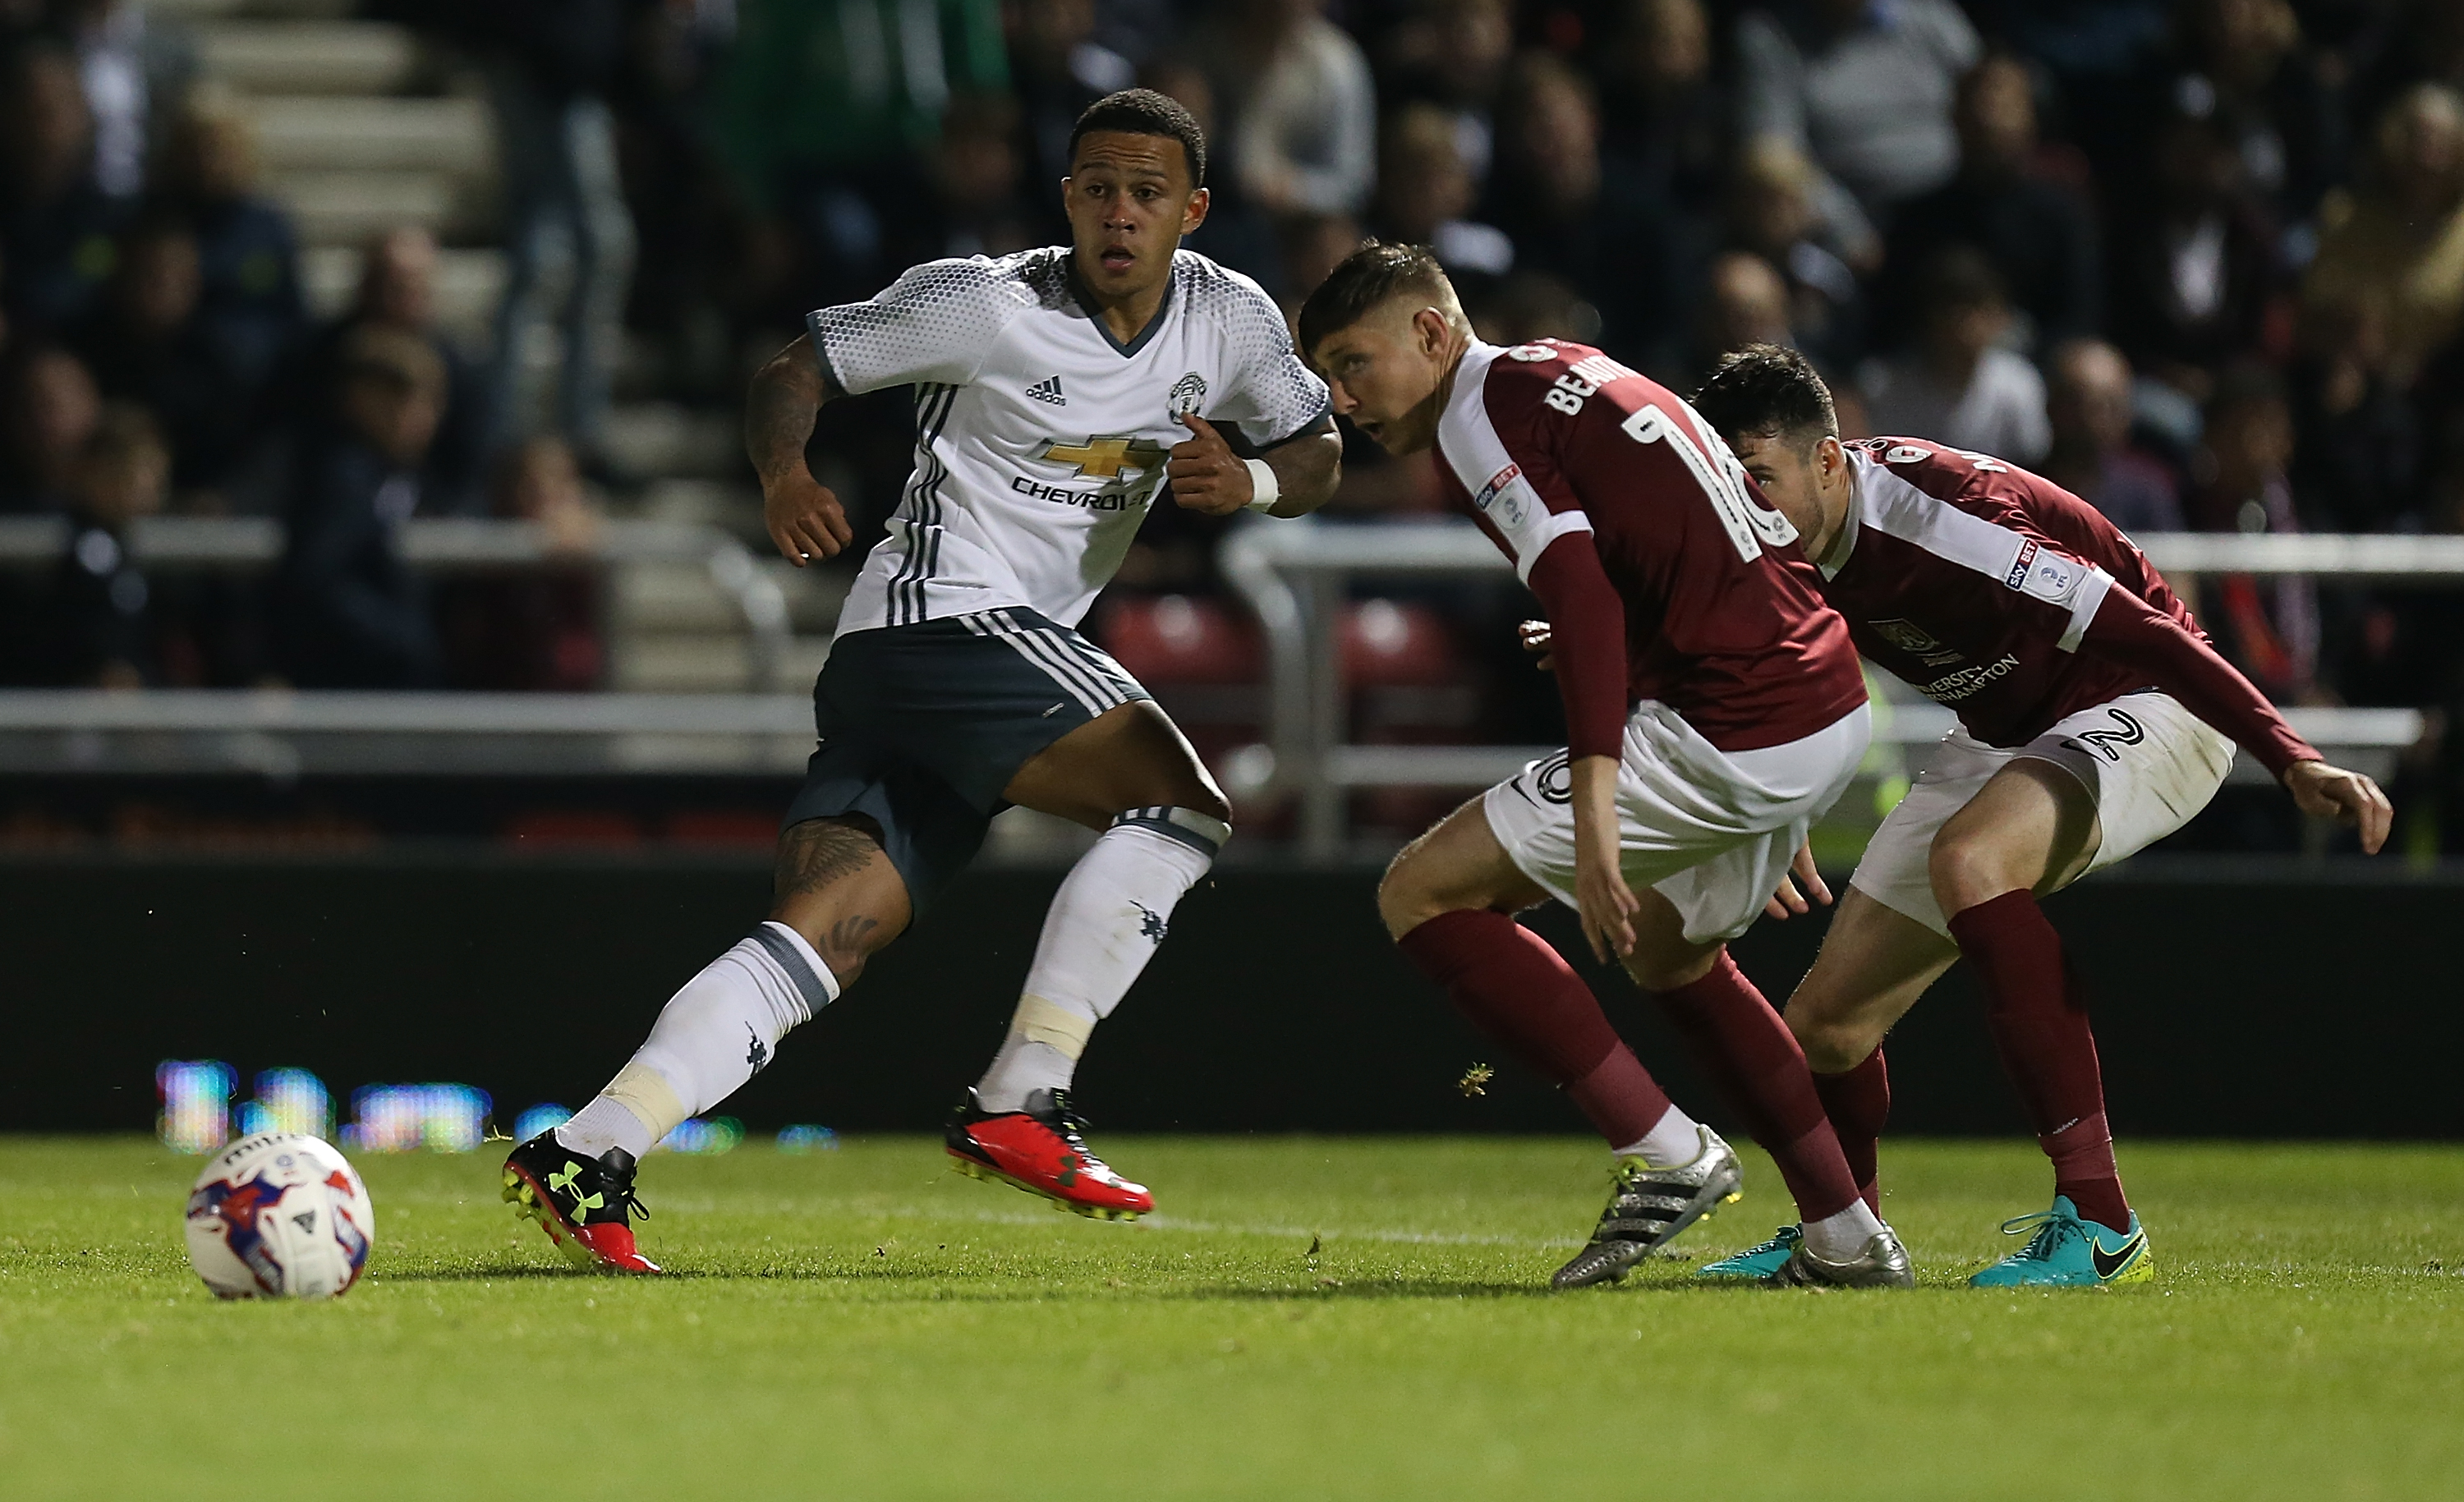 NORTHAMPTON, ENGLAND - SEPTEMBER 21:  Memphis Depay of Manchester United looks to the ball with Harry Beautyman and Brendan Moloney of Northampton Town during the  EFL Cup Third Round match between Northampton Town and Mancester United at Sixfields Stadium on September 21, 2016 in Northampton, England.  (Photo by Pete Norton/Getty Images)